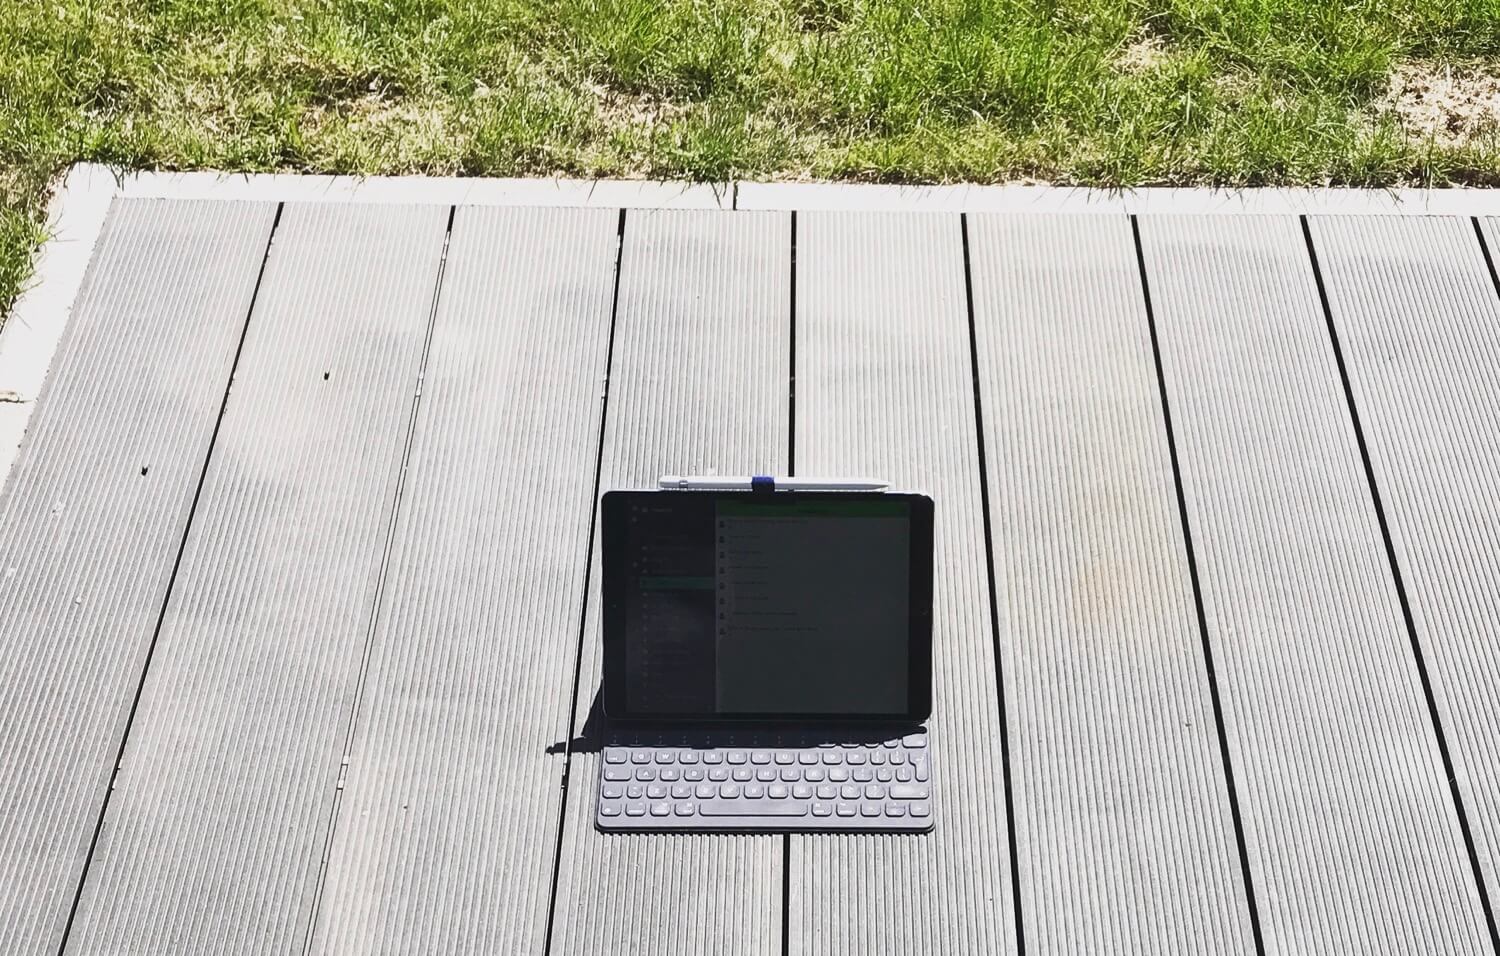 Essential iPad Pro accessories for an #iPadOnly life